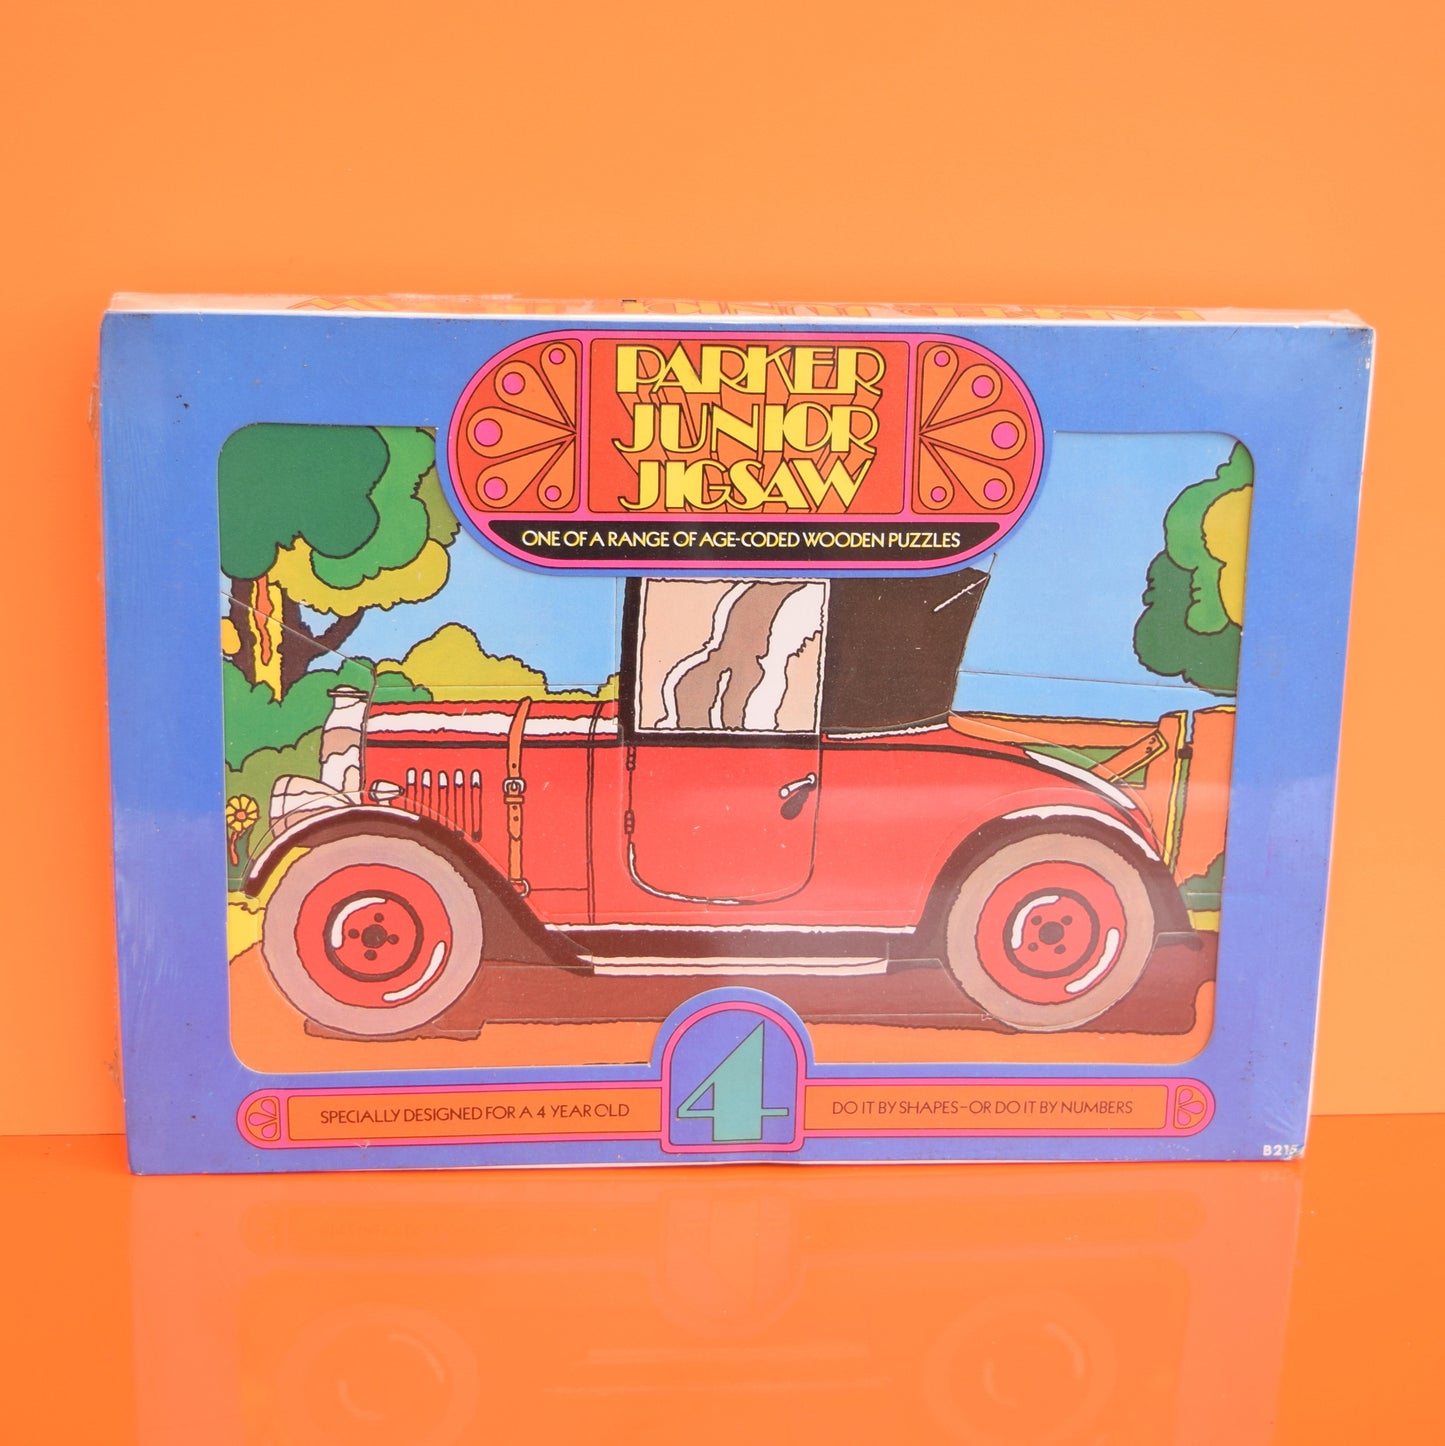 Vintage Unused 1970s Wooden Jigsaw Puzzle - Junior Parker - Choice Of Ages